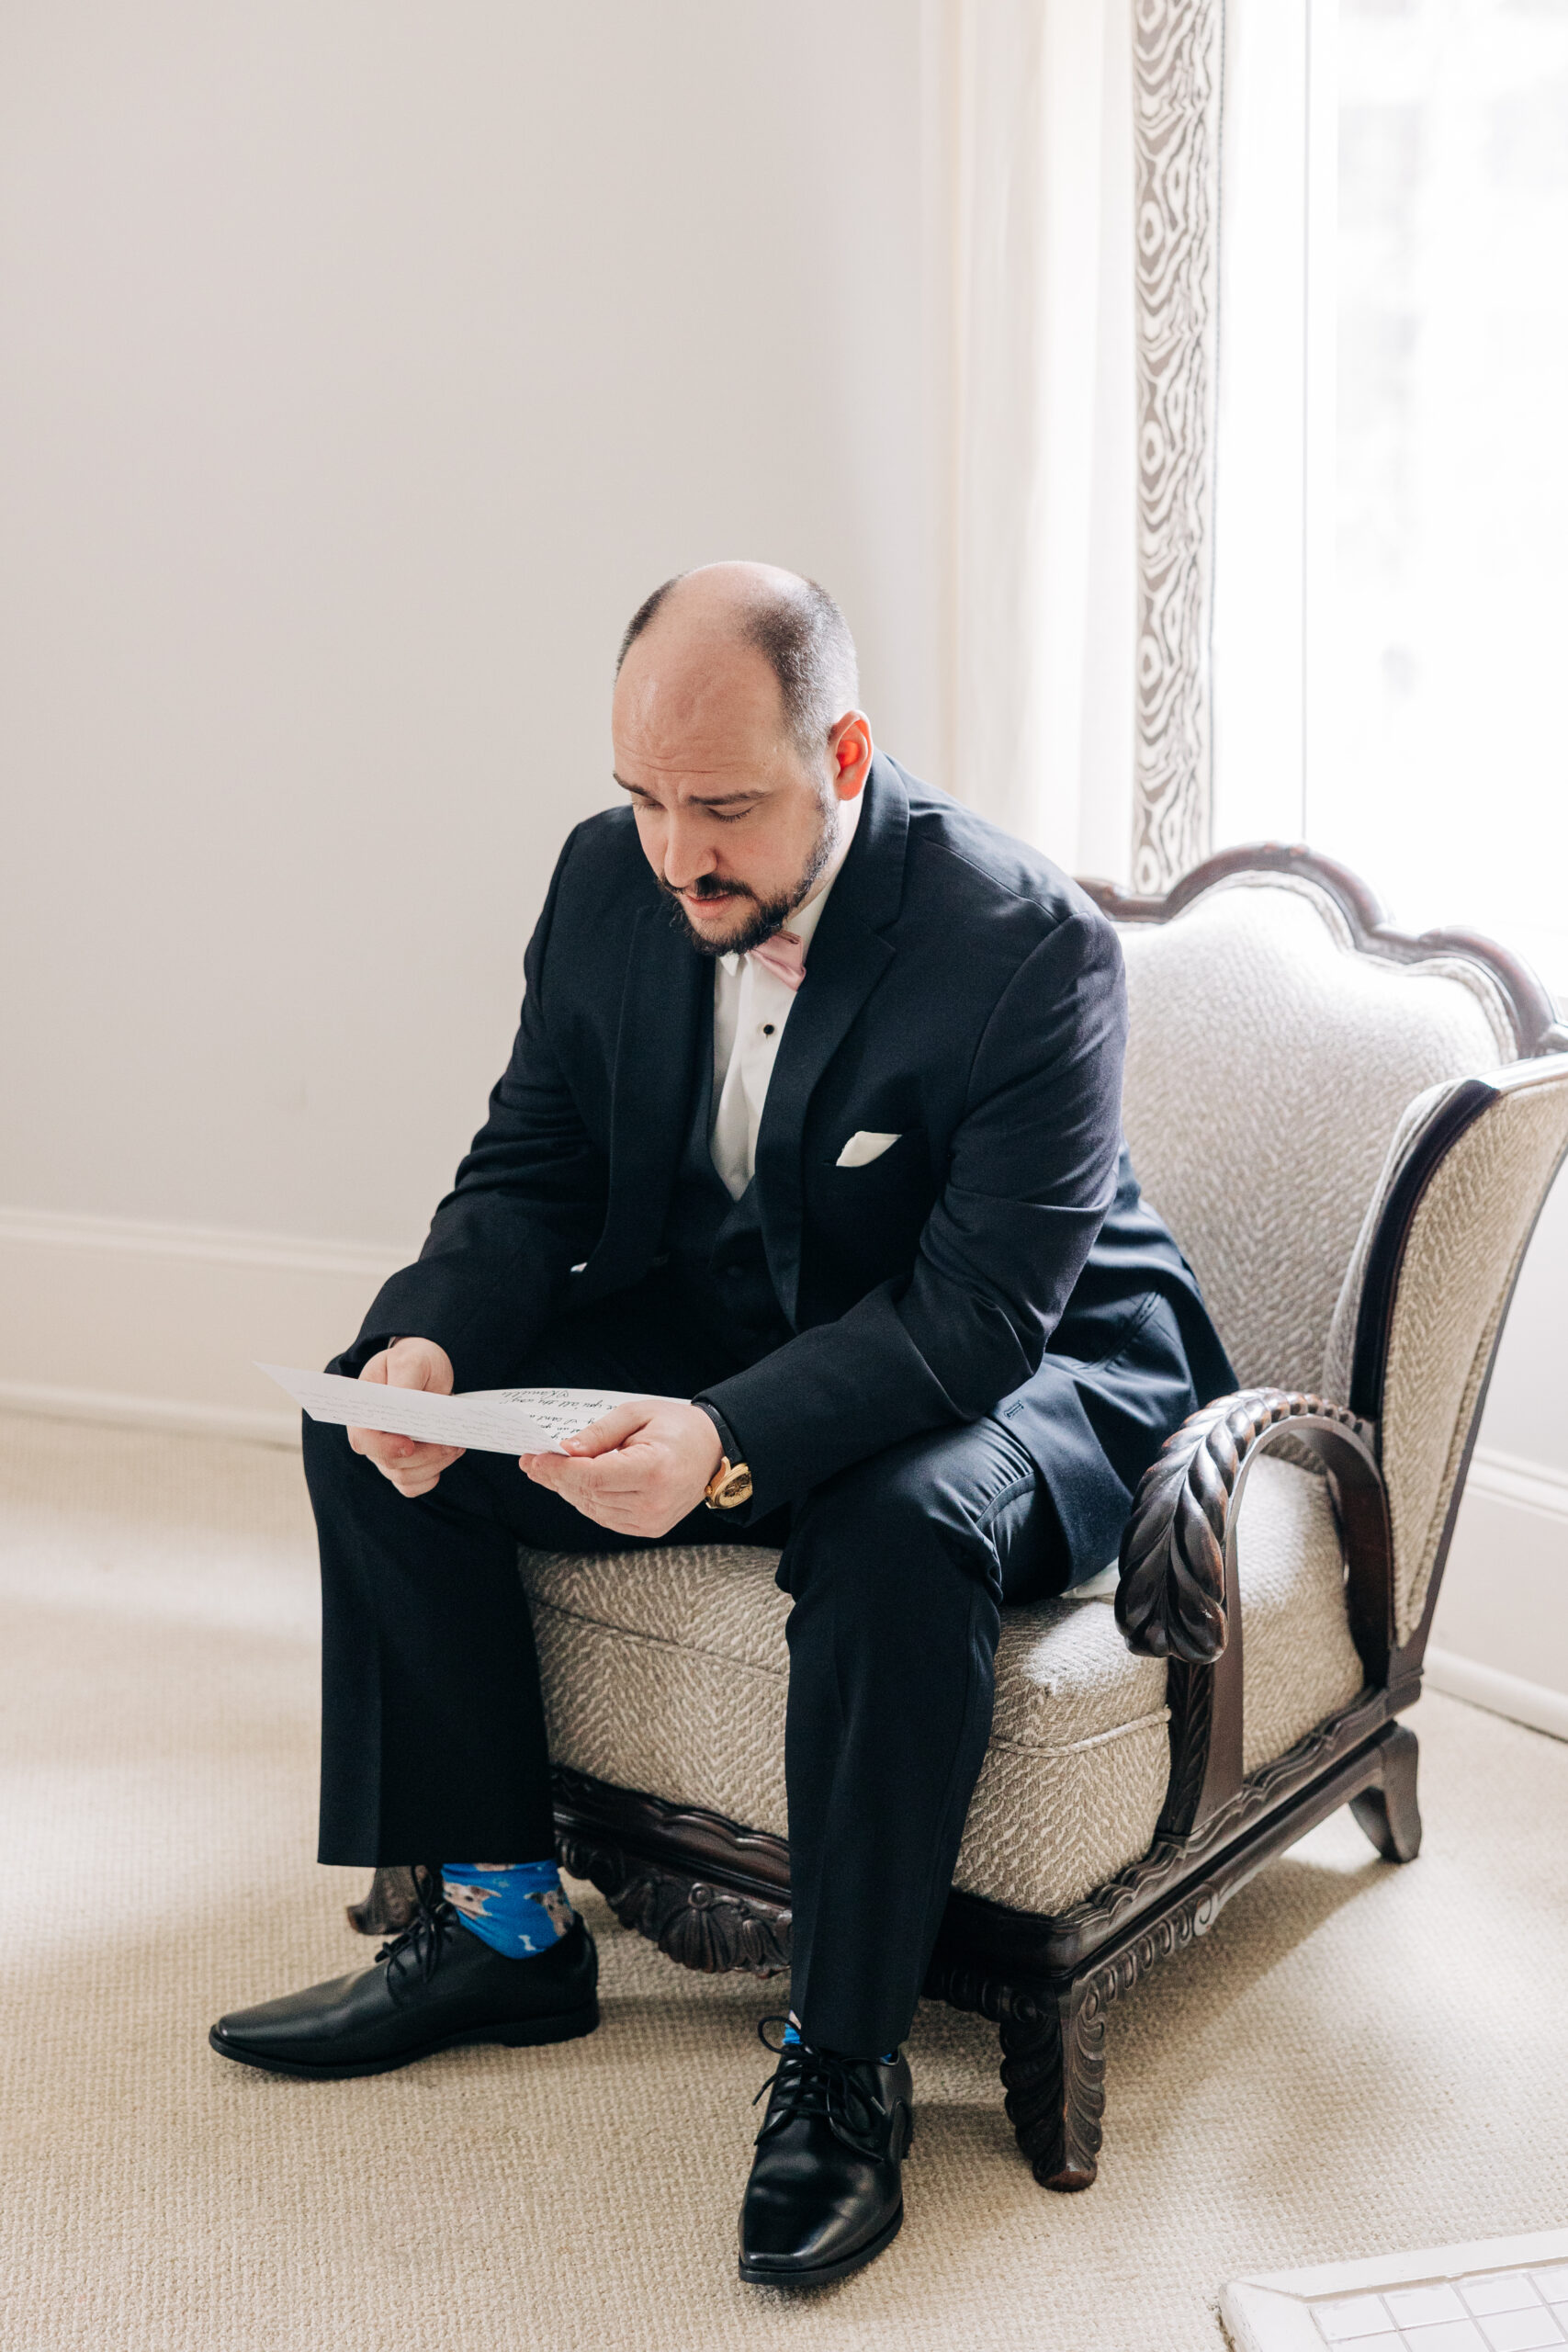 A groom sits in an ornate chair under a window reading a letter in his suit